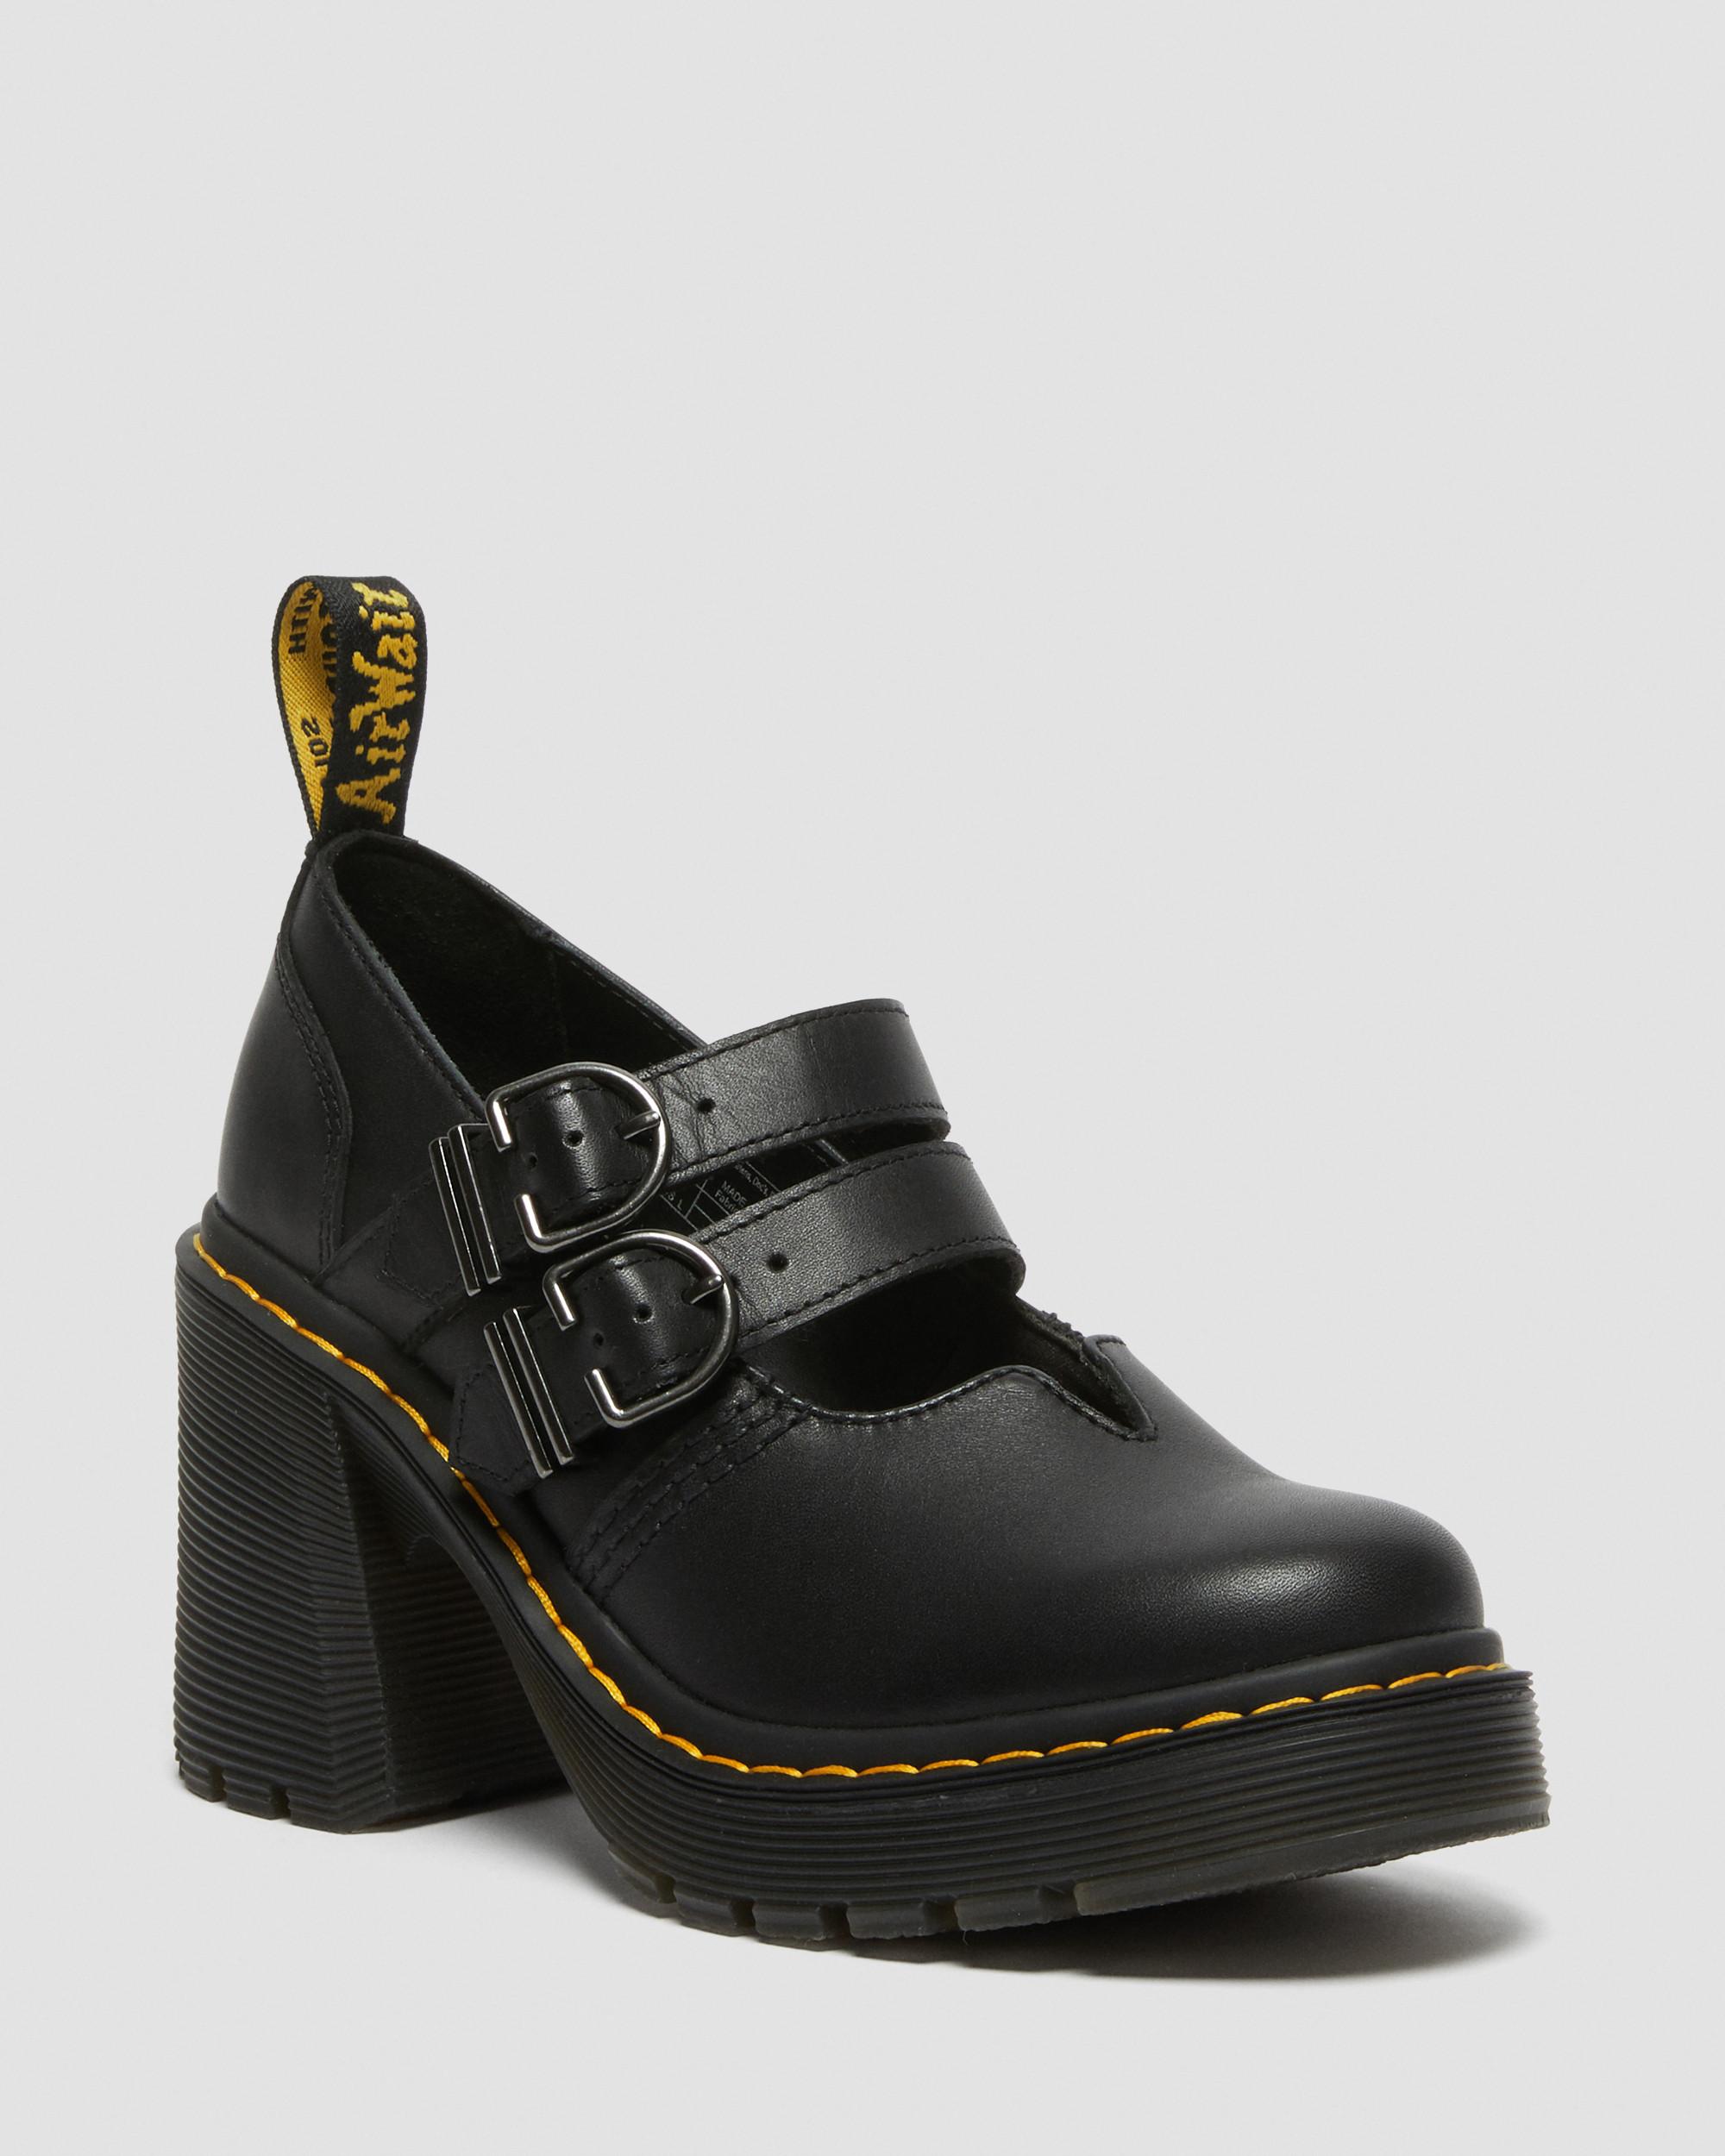 Eviee Sendal Leather Heeled ShoesEviee Sendal Leather Heeled Mary Jane Shoes Dr. Martens